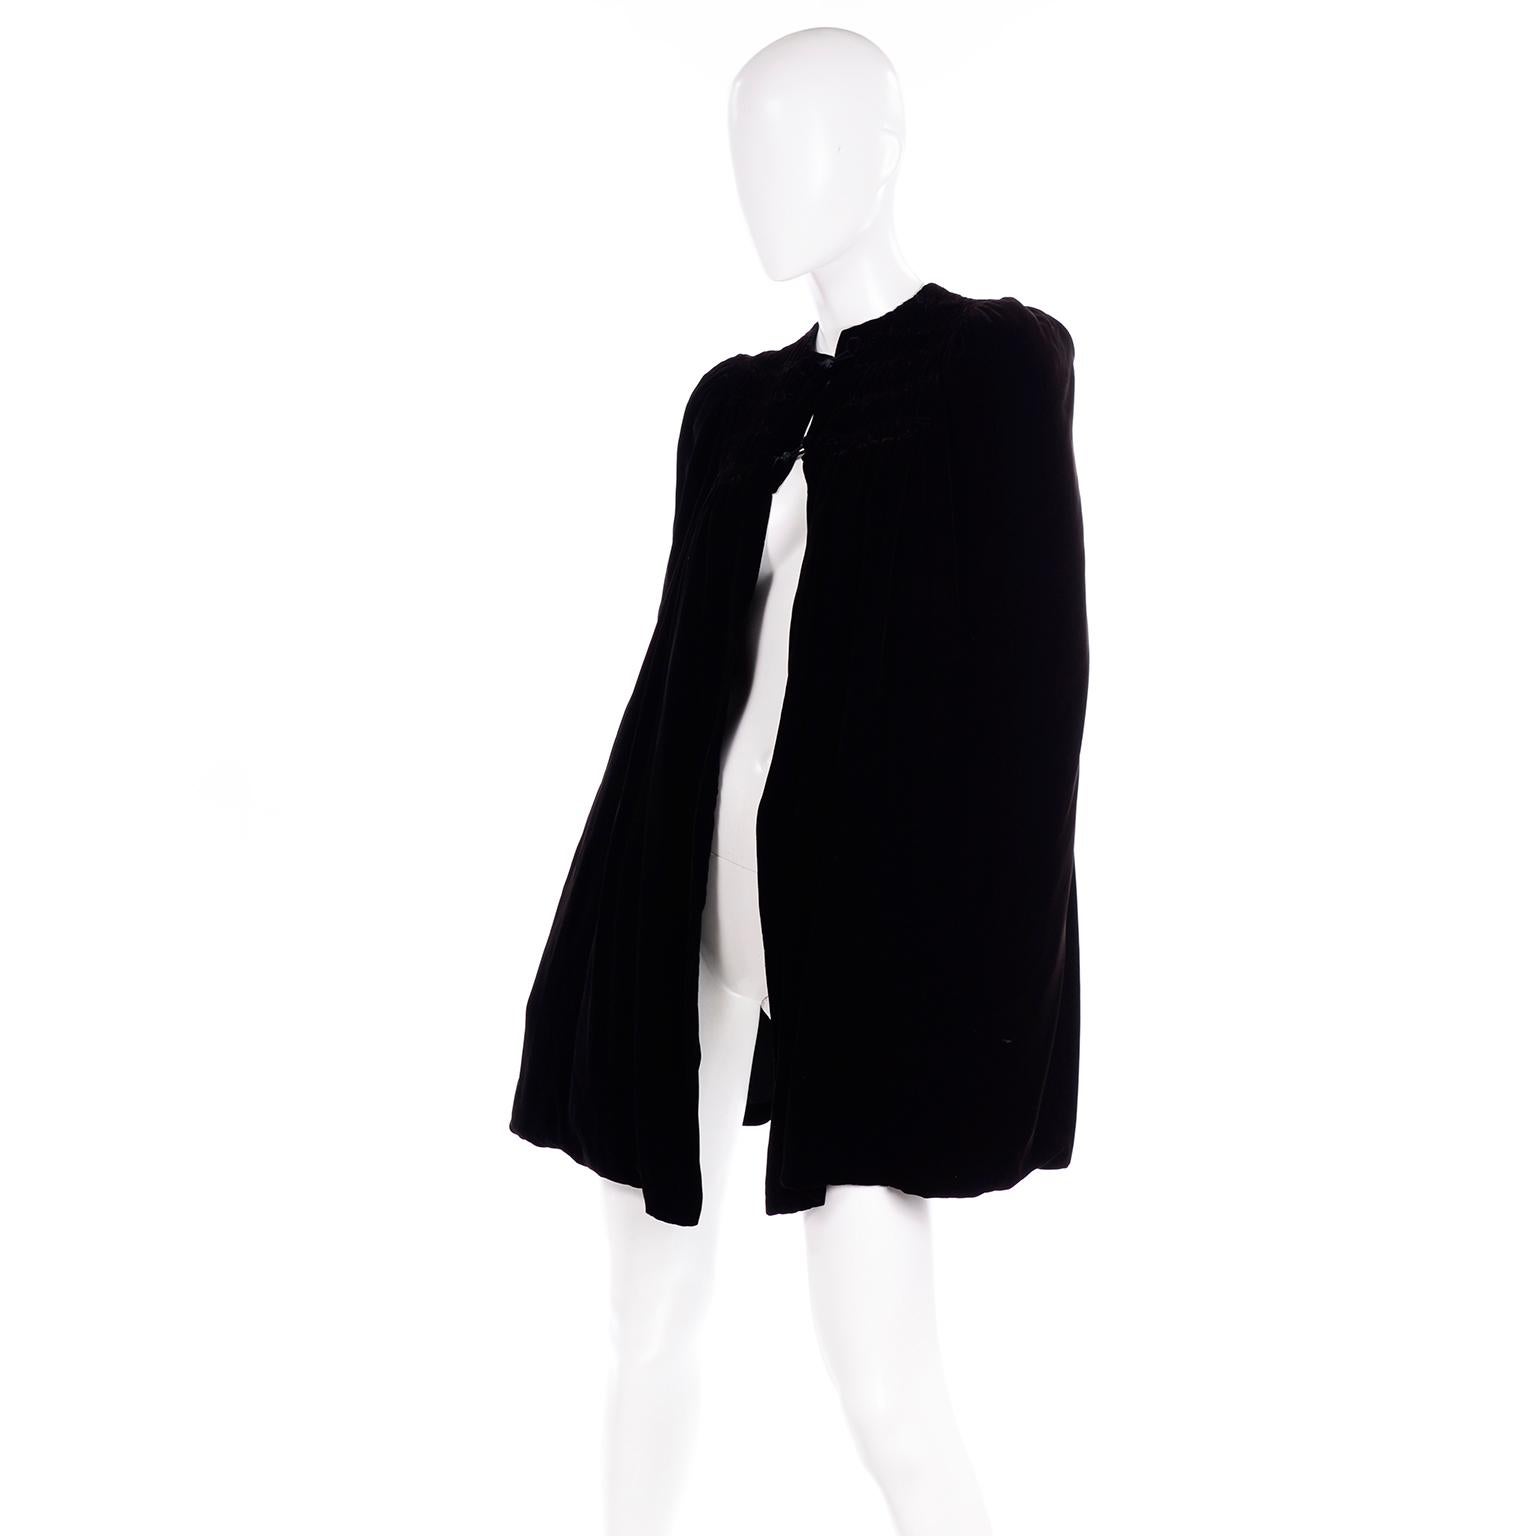 This exquisite vintage Edwardian black velvet cape is reversible, with lovely shirring along the bodice. The capet closes with a satin loop over velvet covered buttons. It has no arm holes and can be worn either with the black velvet out, or the